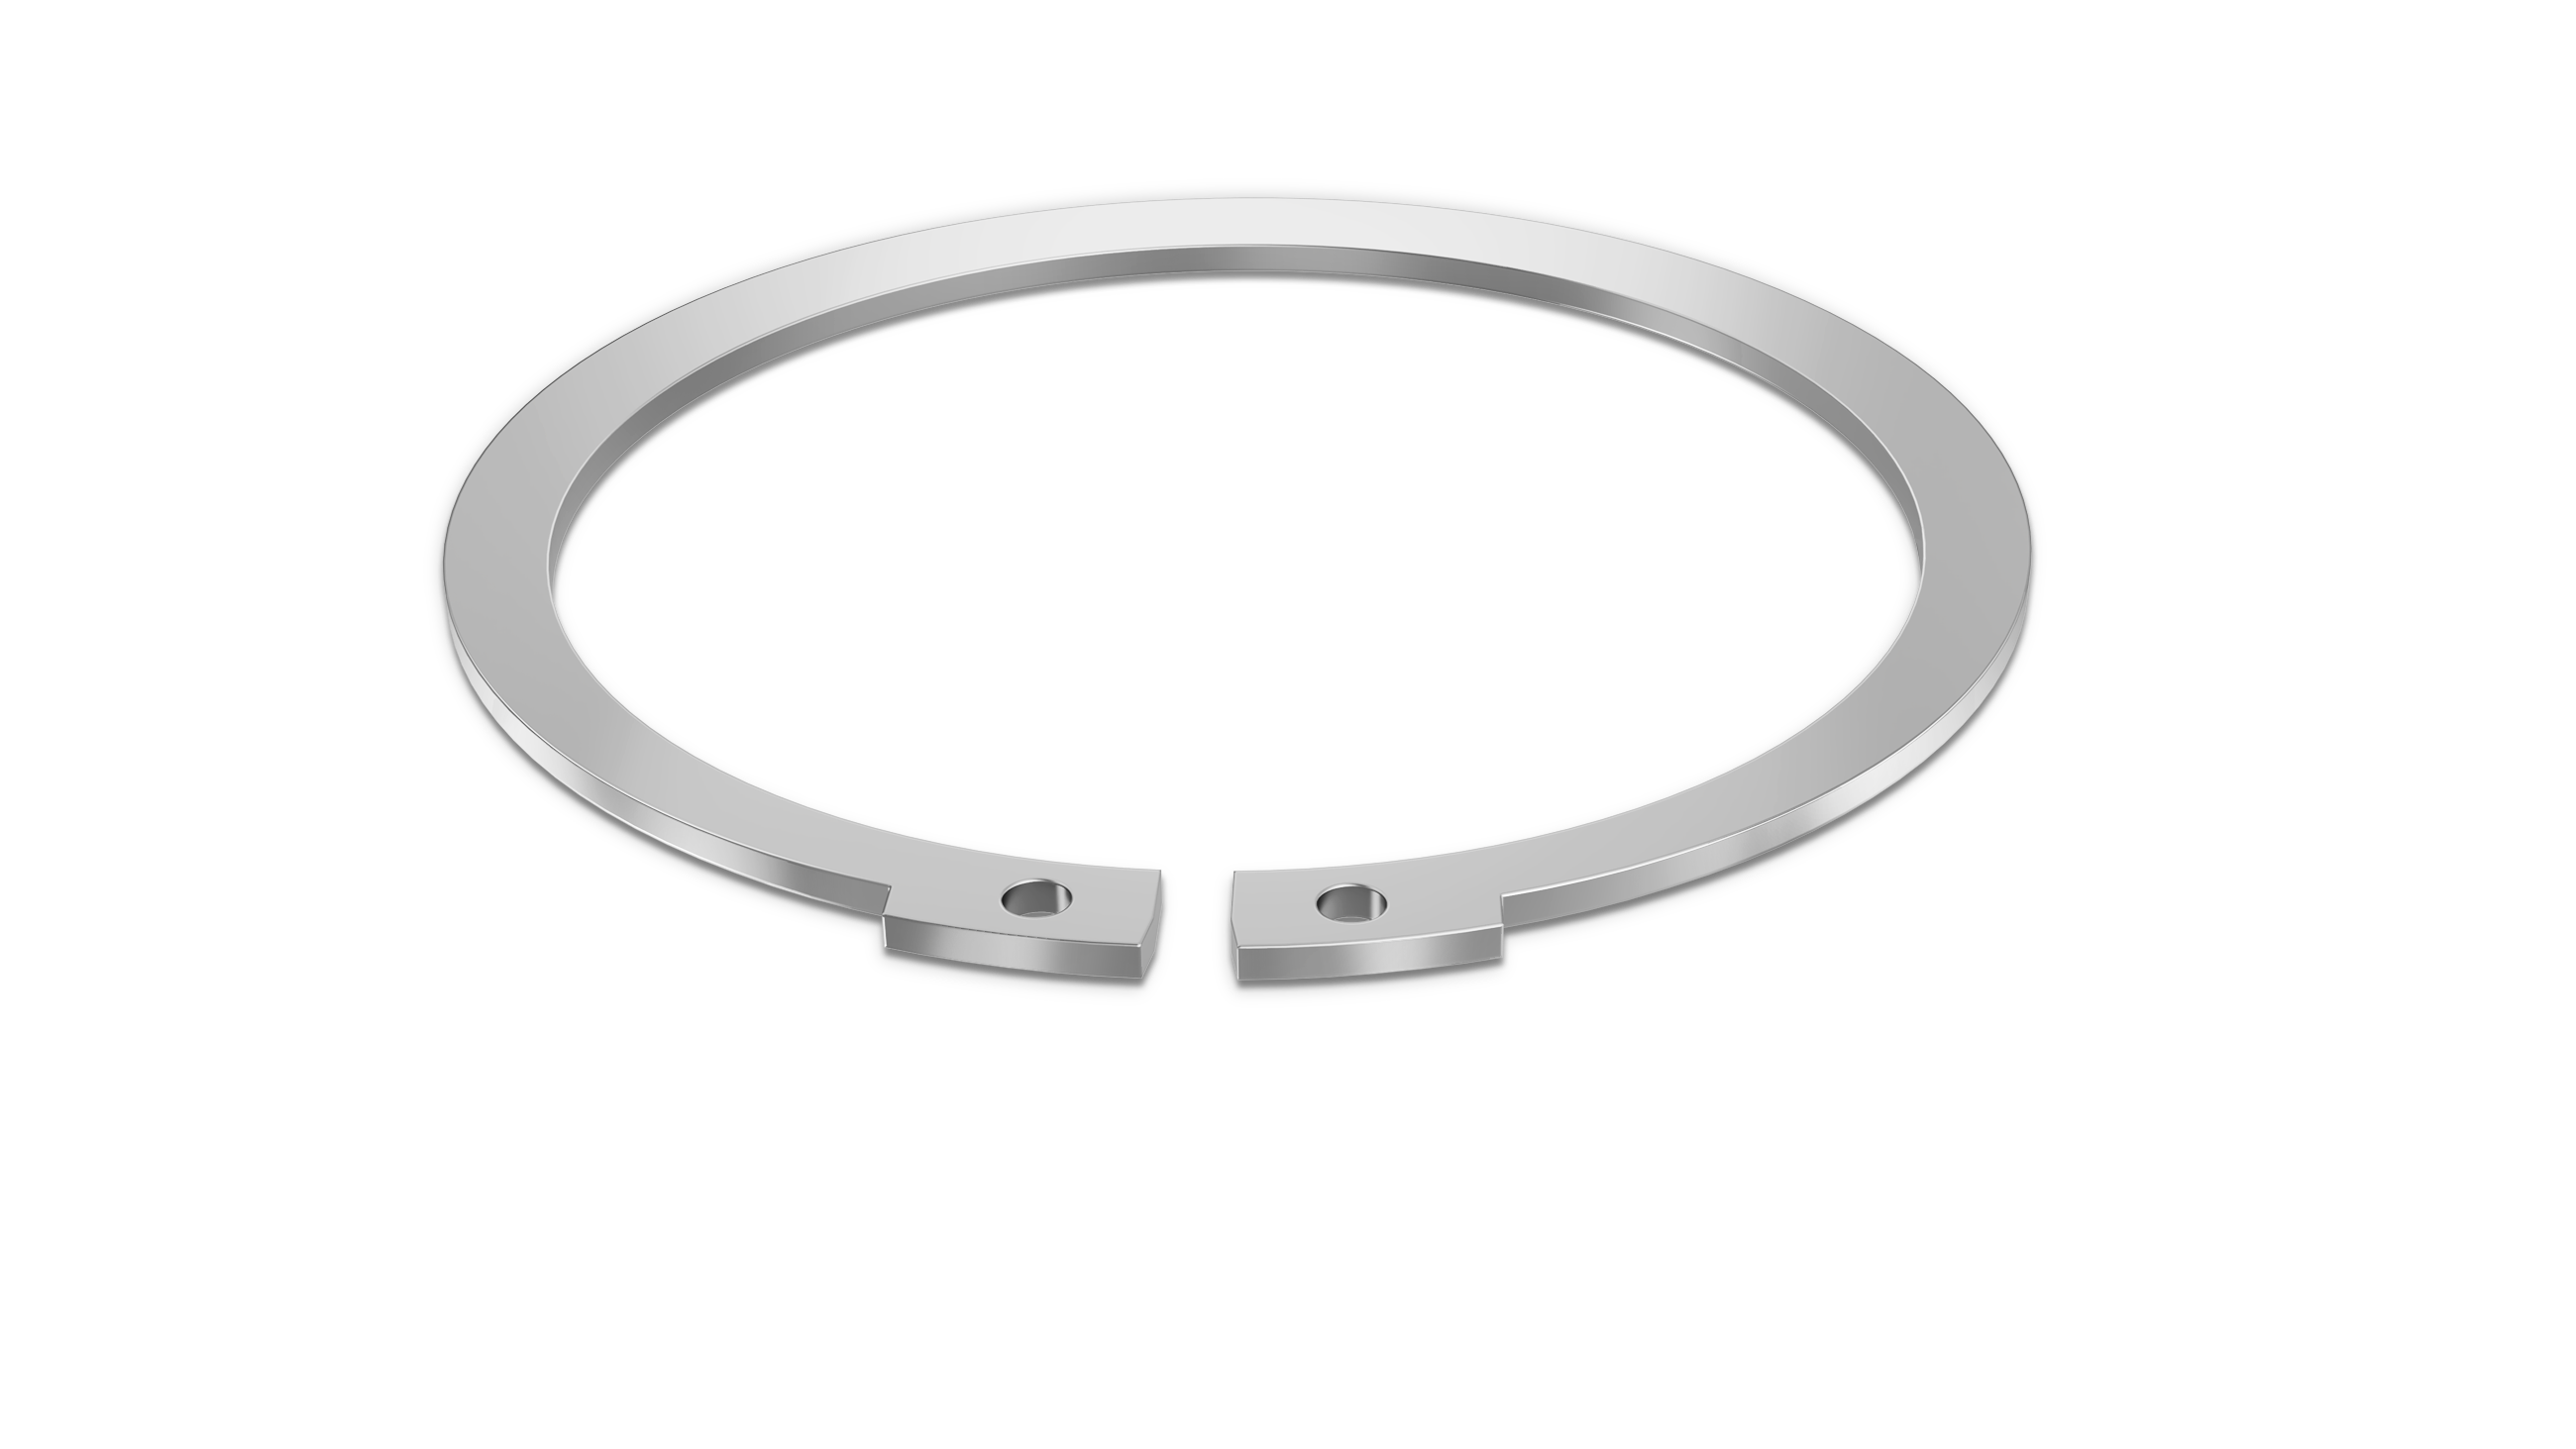 Tapered Section Retaining Rings